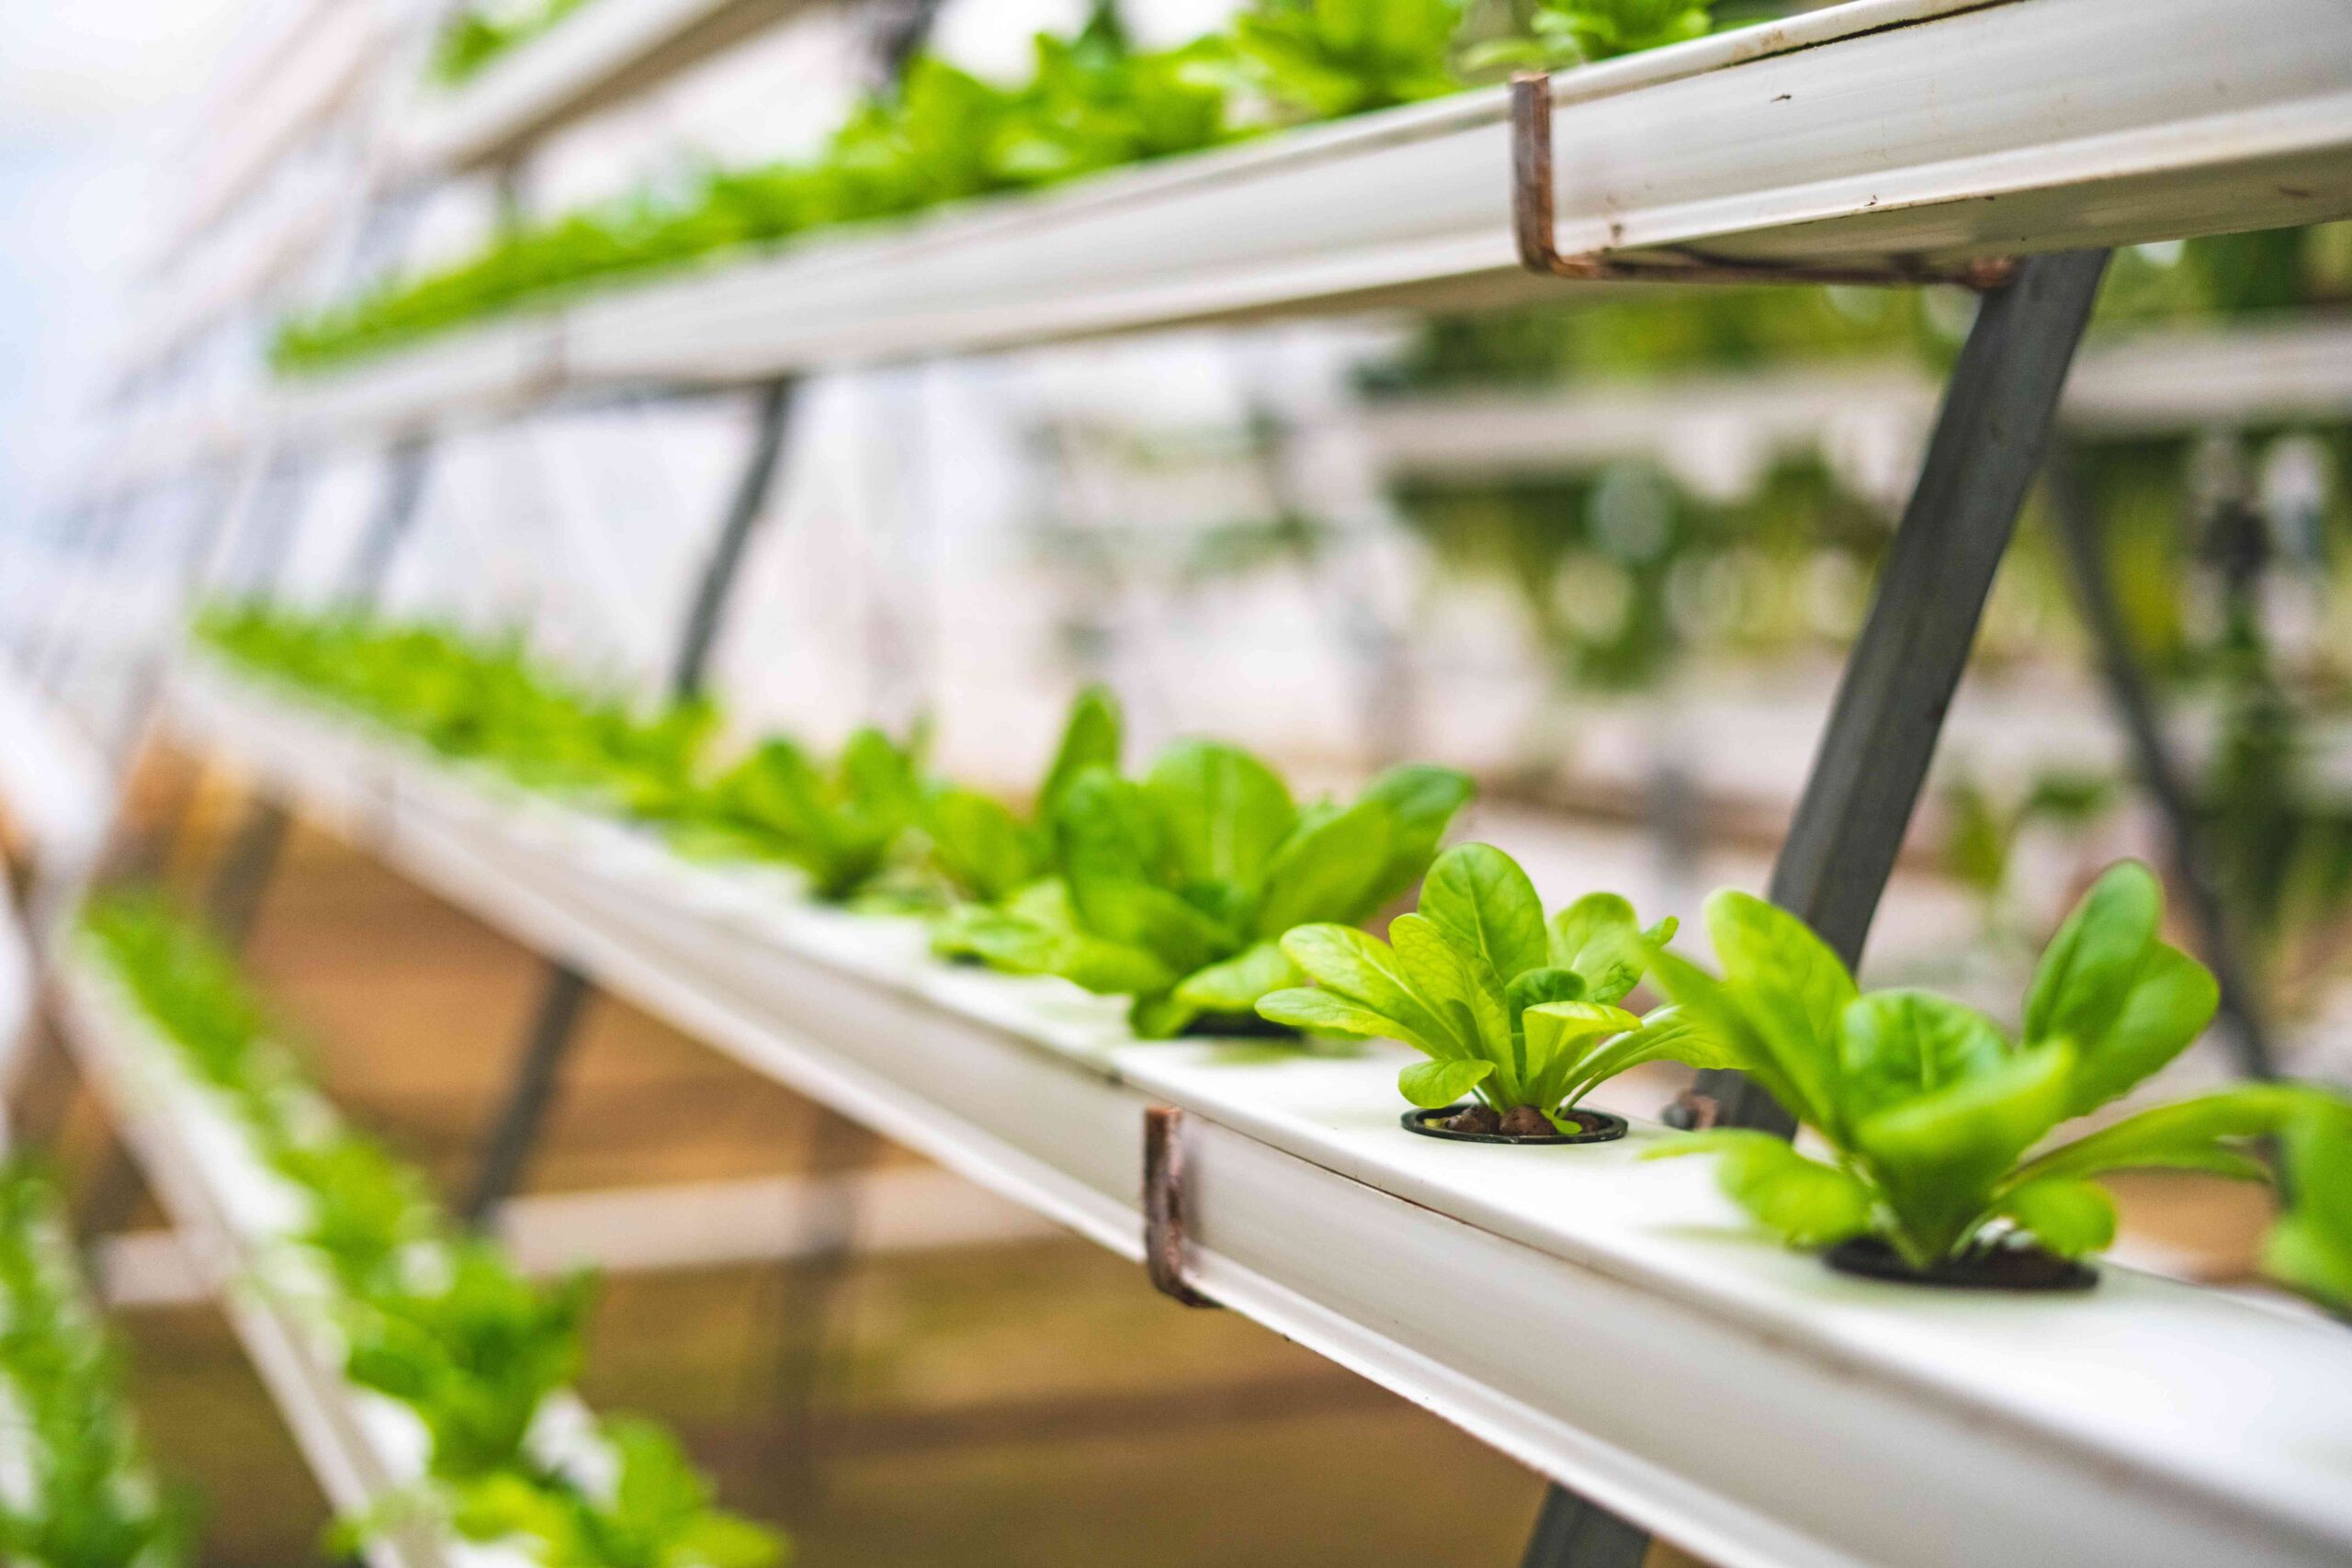 How to build a cheap hydroponic system